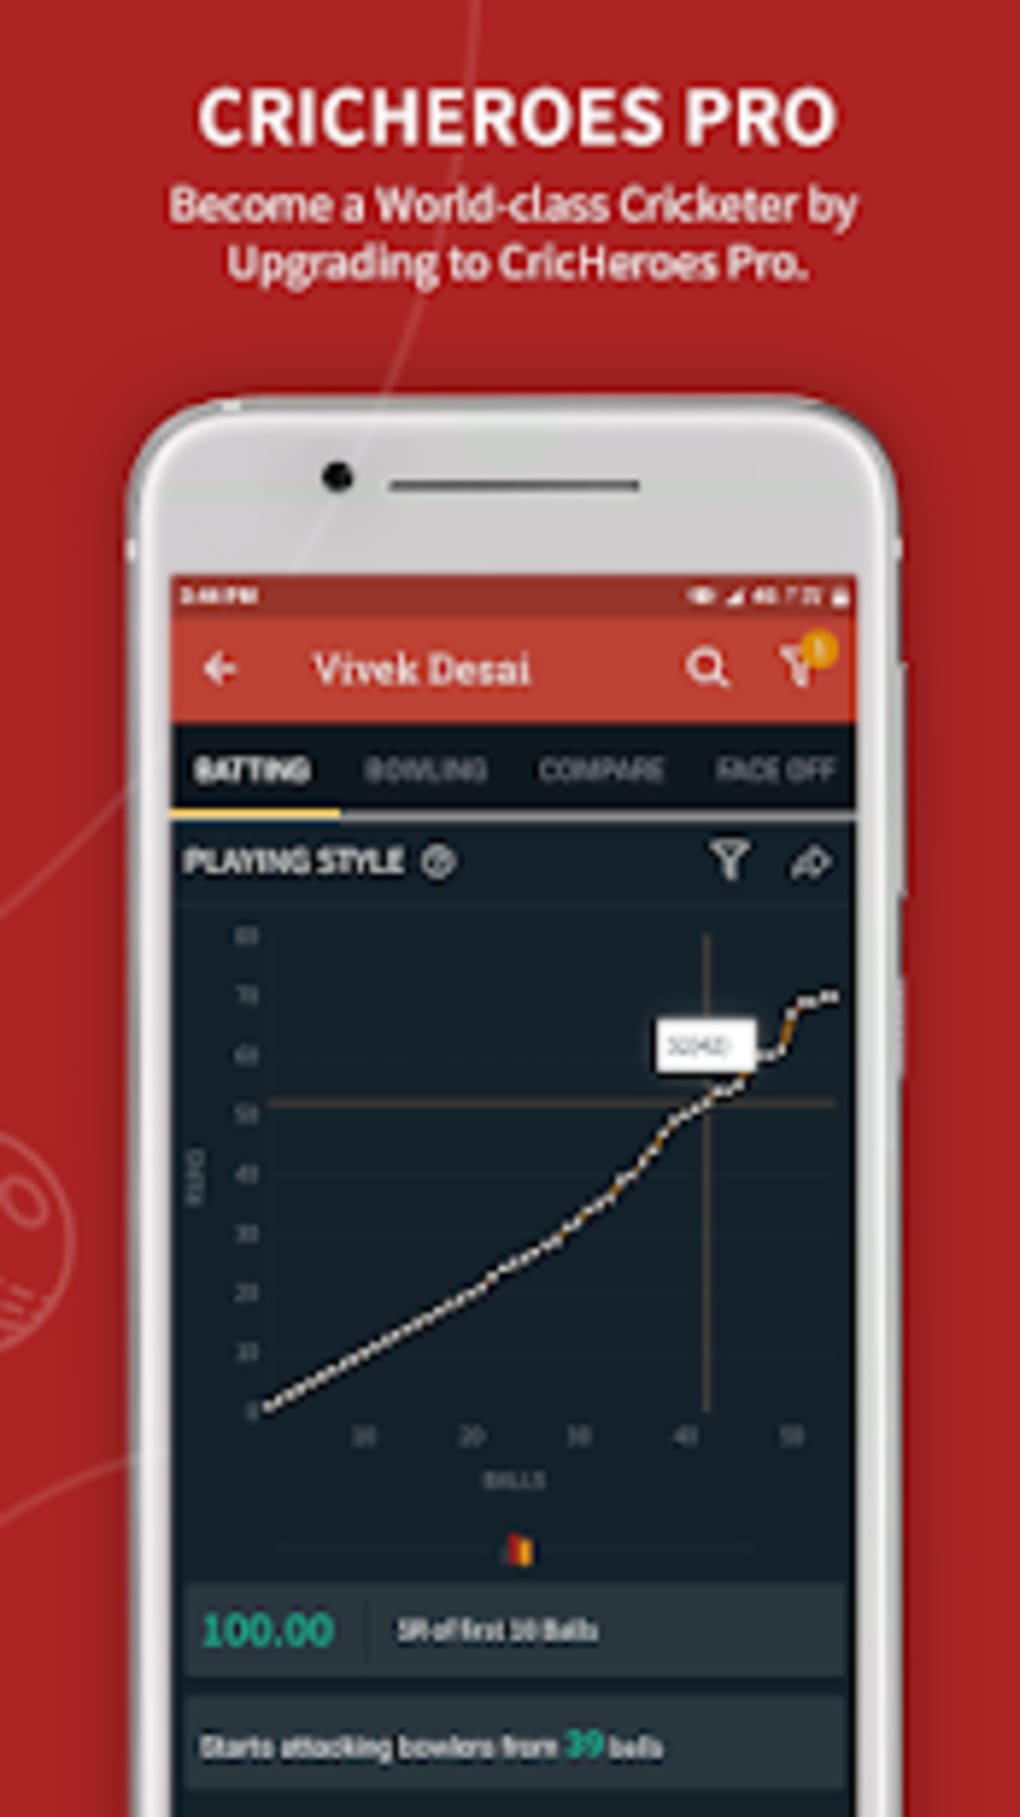 Cricket Scoring App - CricHeroes APK for Android